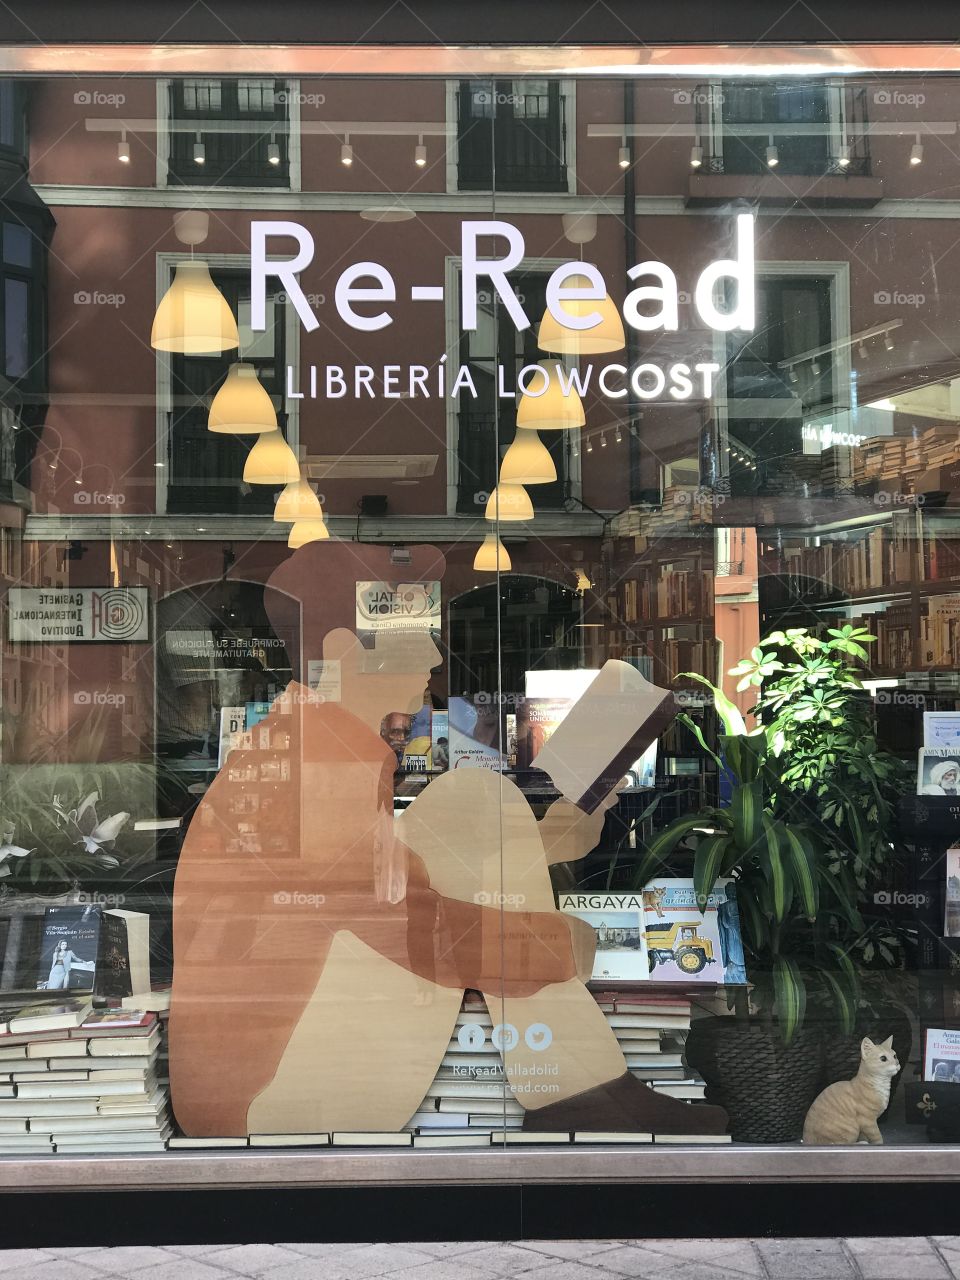 Glass logo of Re-Read